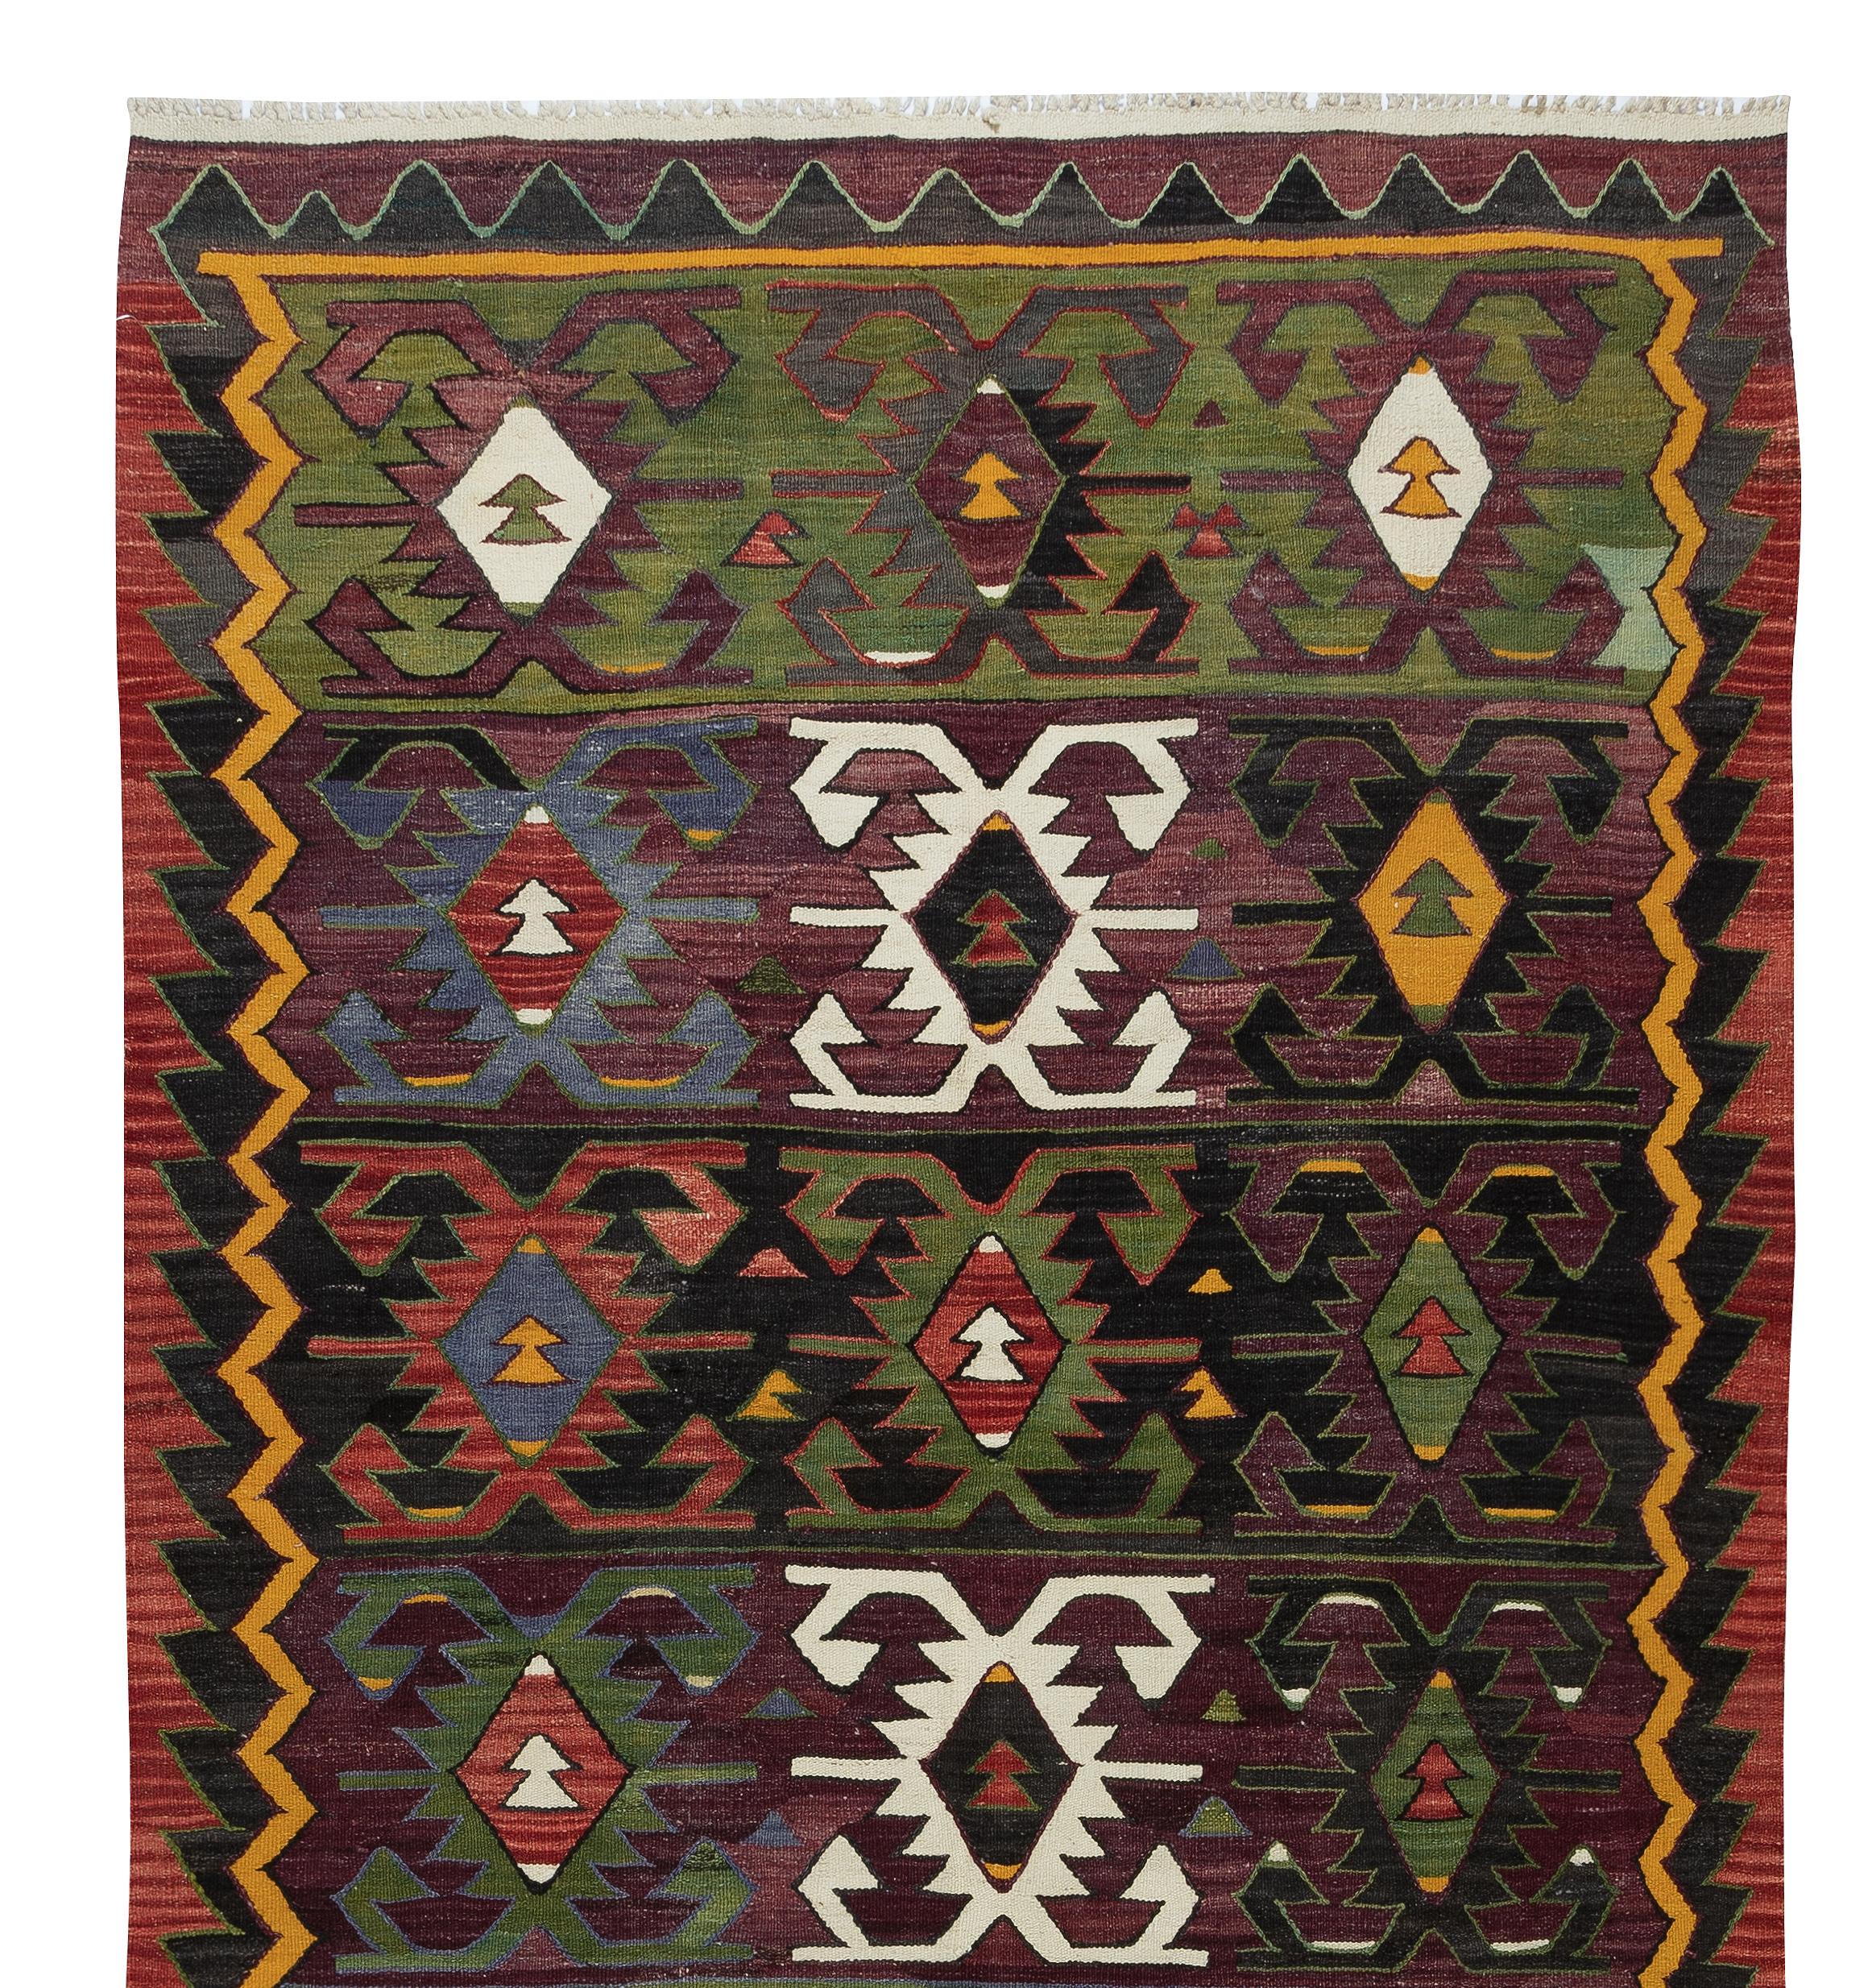 Turkish 5.3x11.5 Ft Colorful Vintage Hand-Woven Anatolian Kilim, Flat-Weave Runner Rug For Sale